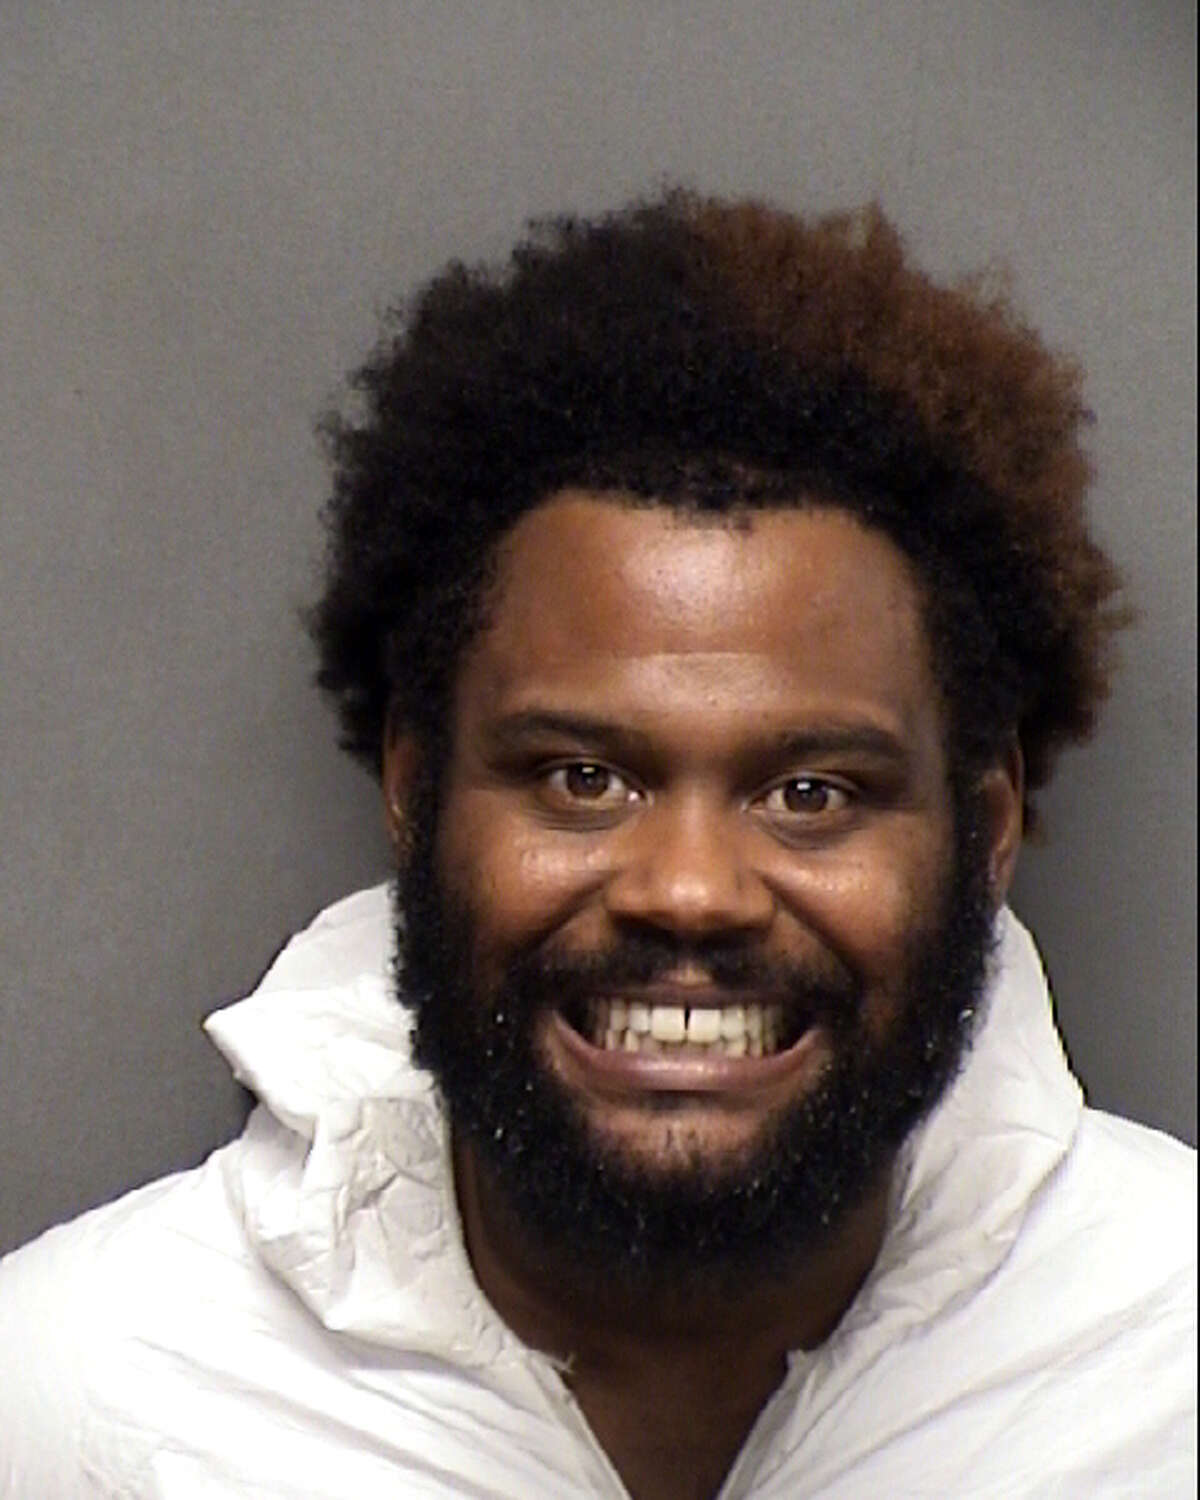 Jessie MacWilliams, 32, was charged with murder in connection with a deadly shooting at a San Antonio LA Fitness. 